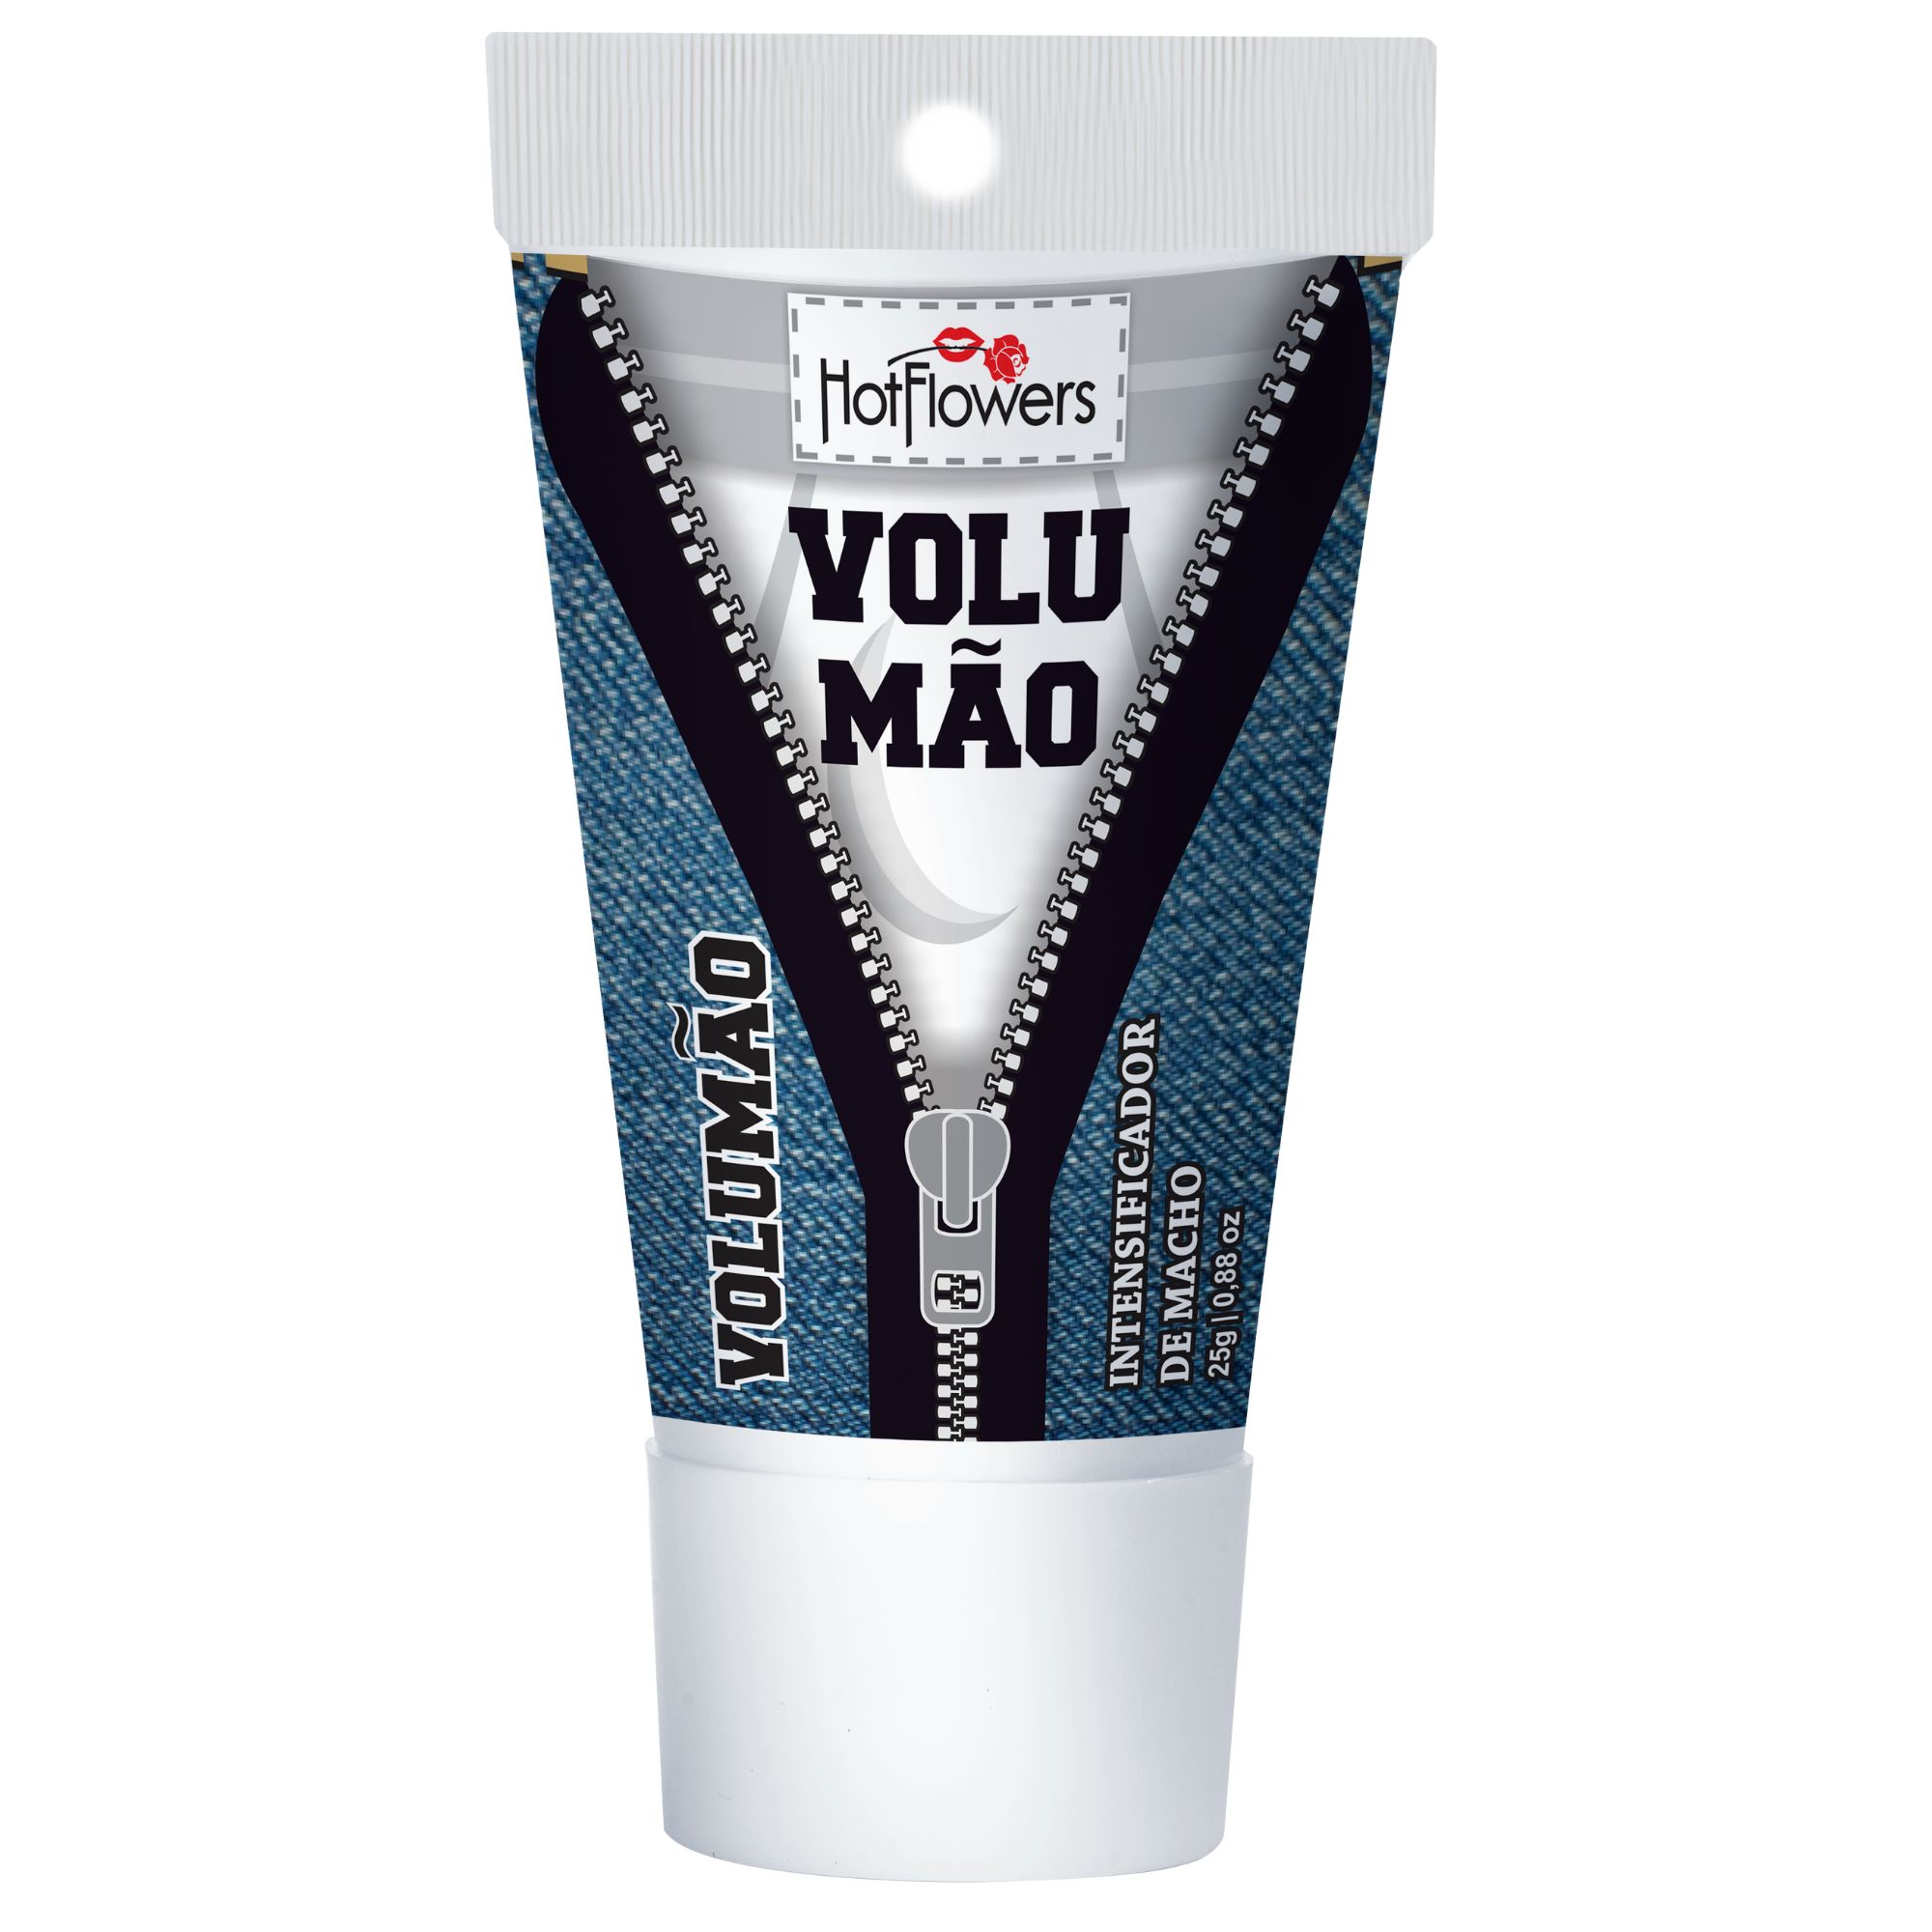 The favorite: Volumão is a male exciting gel that enriches the erection.